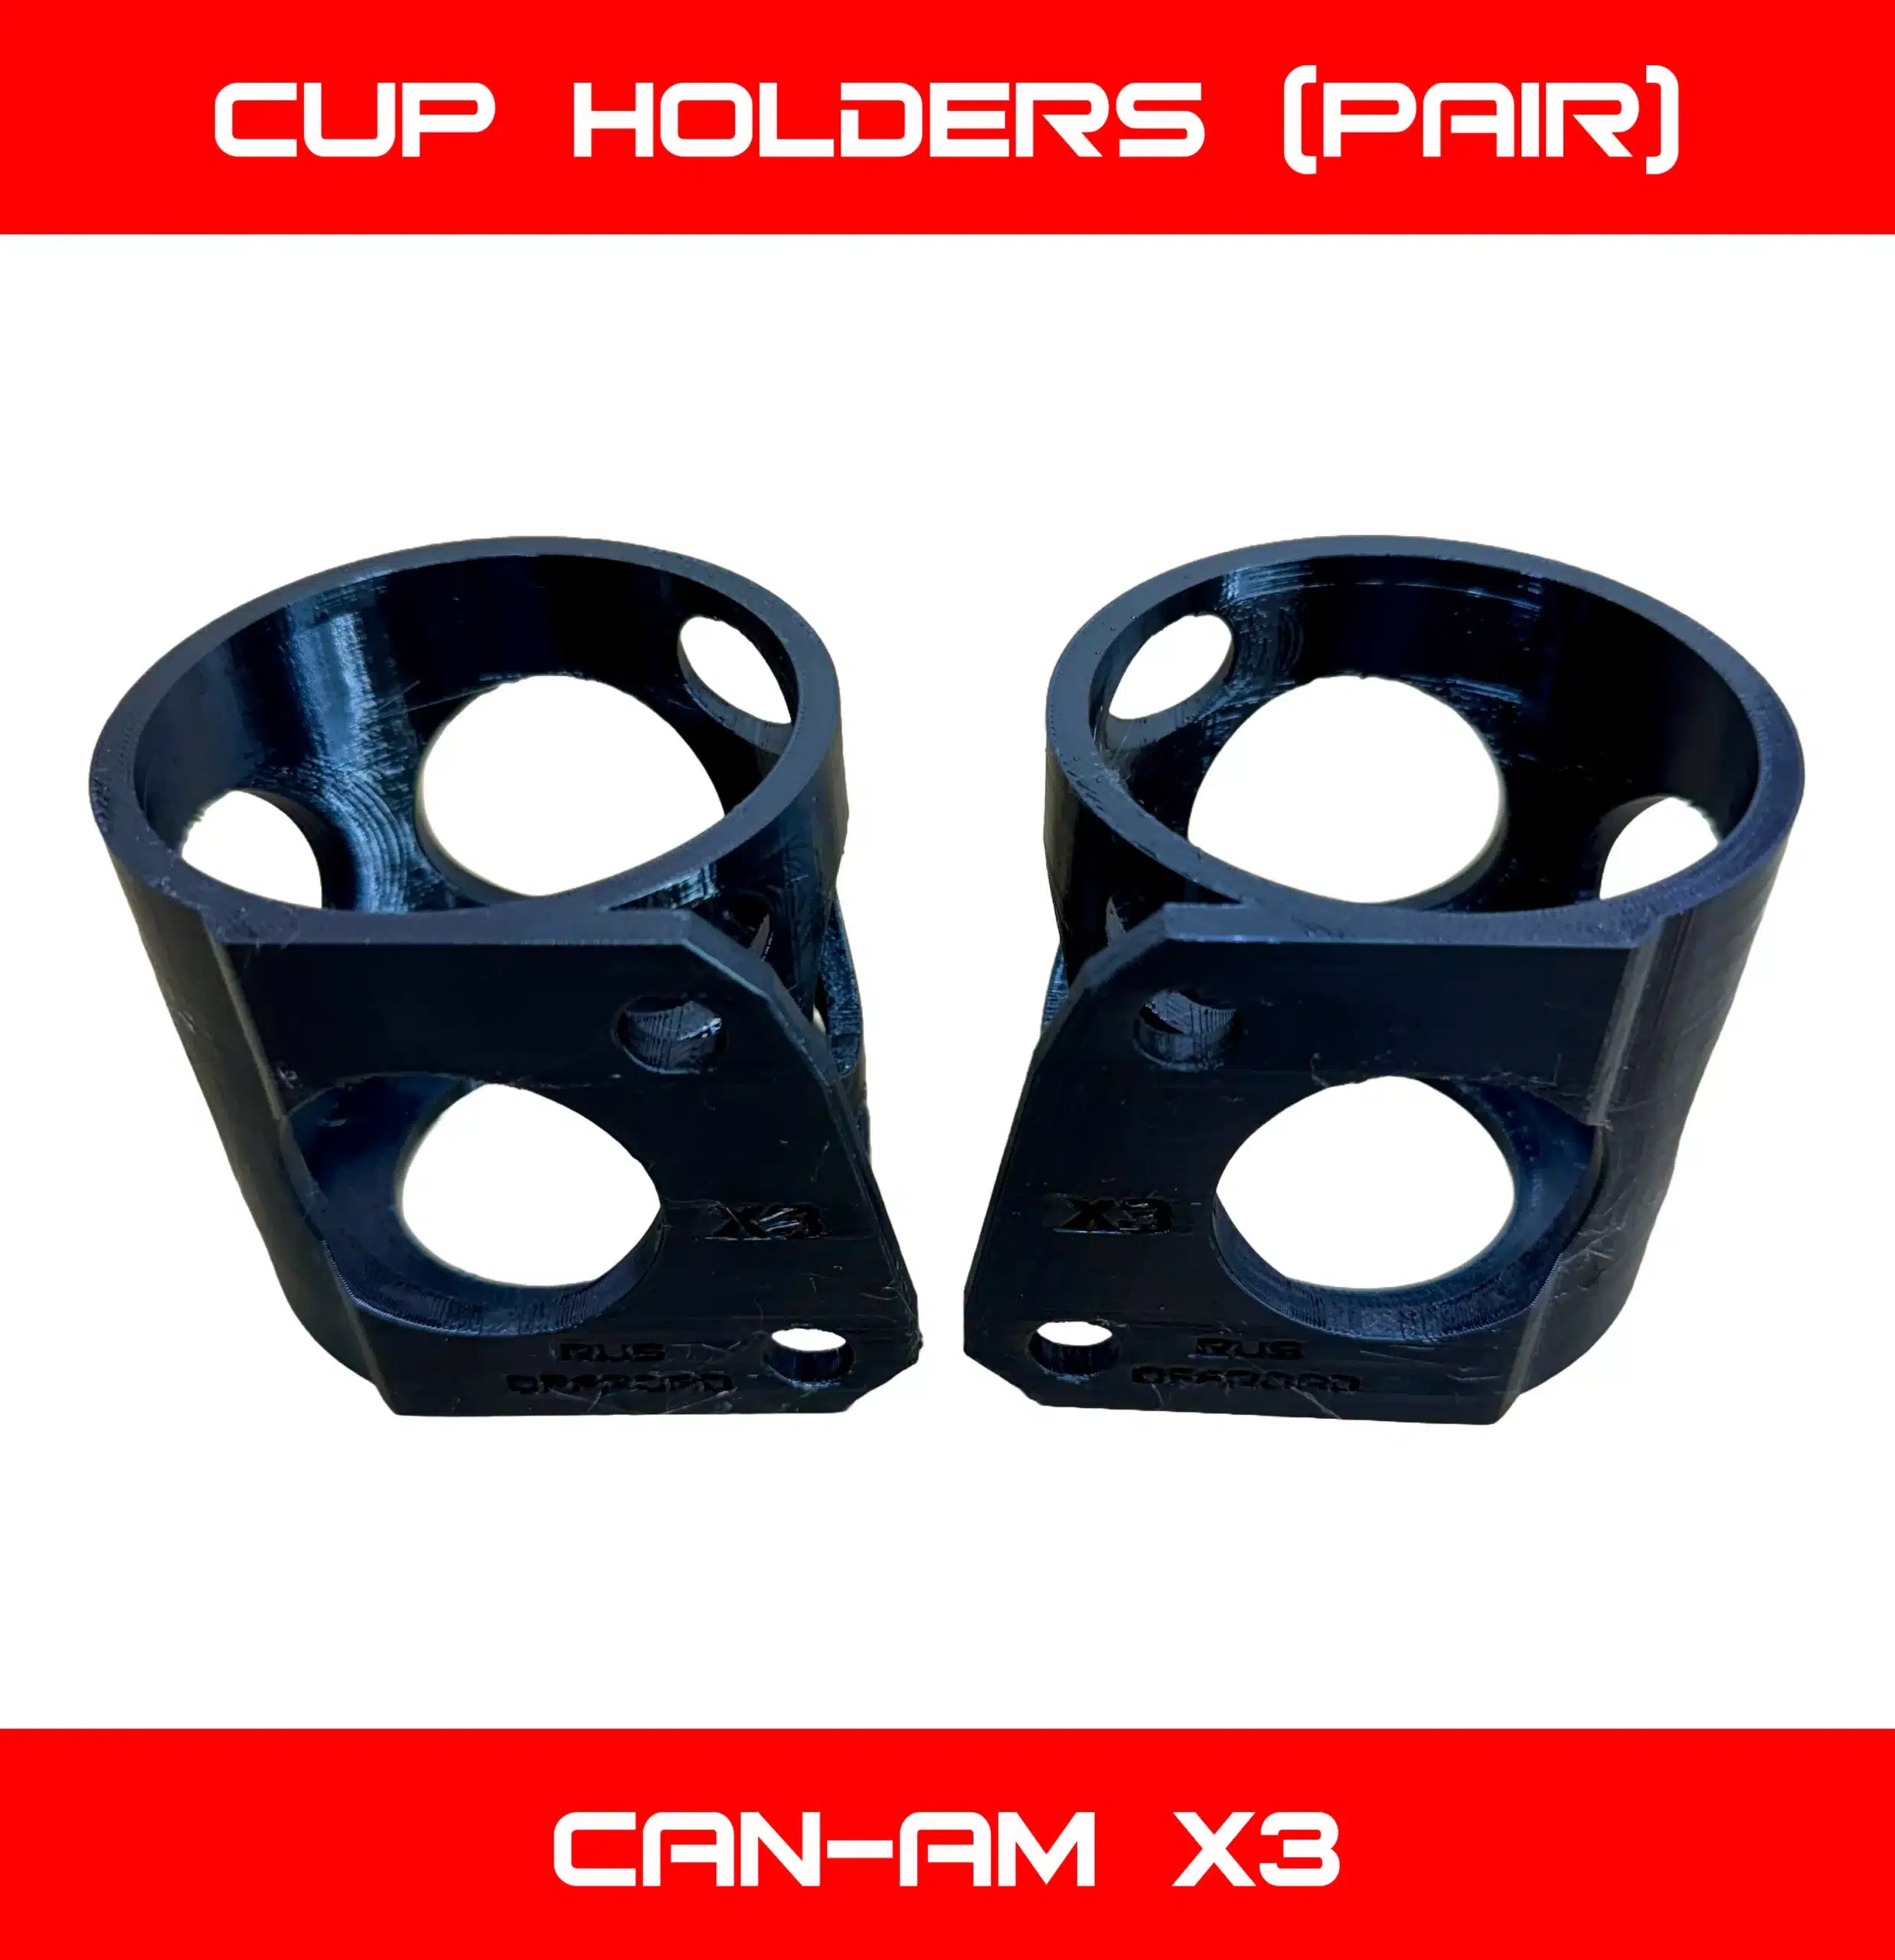 Cup Holders